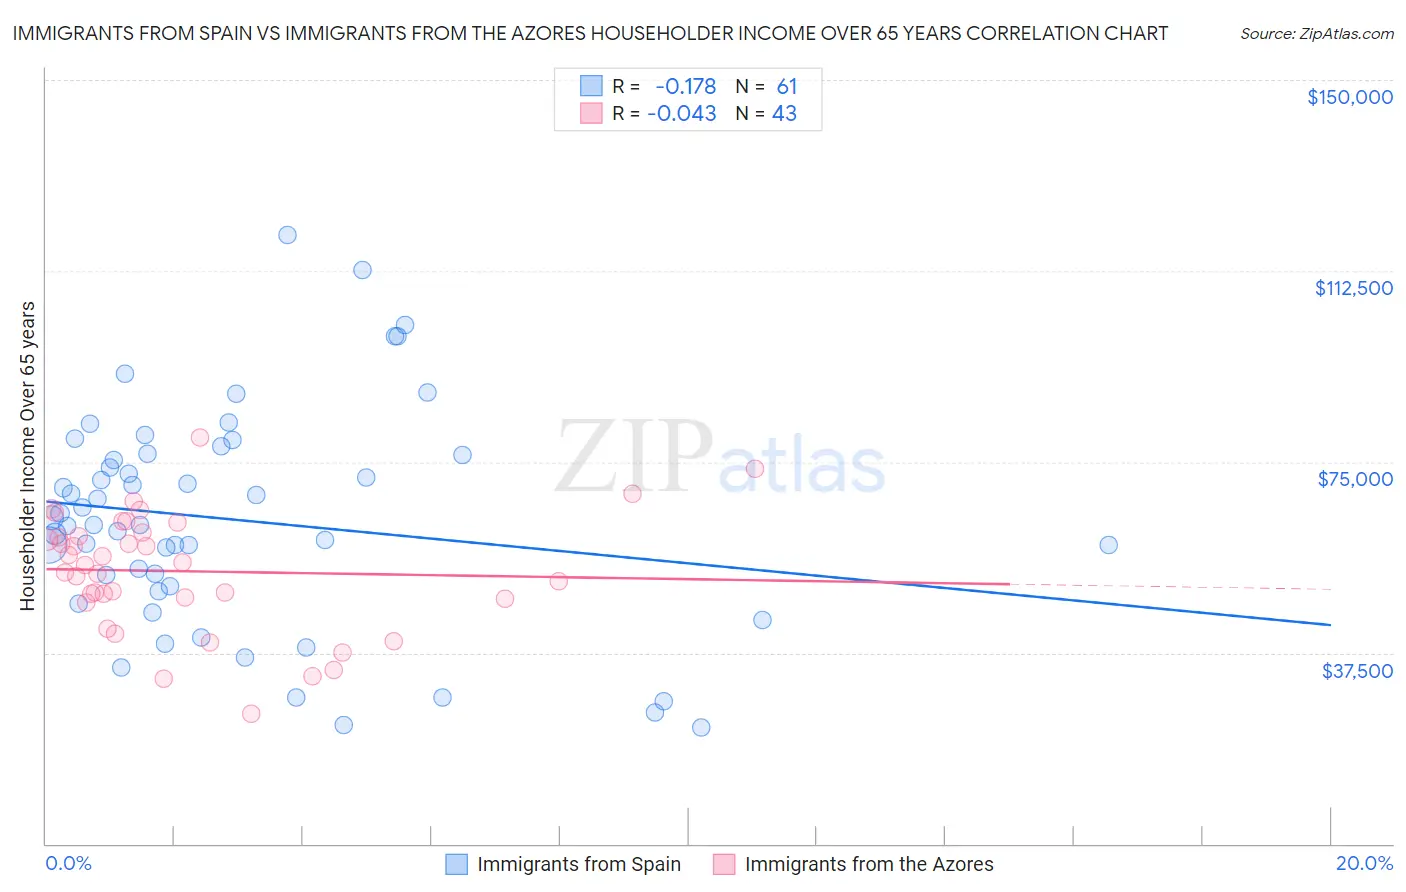 Immigrants from Spain vs Immigrants from the Azores Householder Income Over 65 years